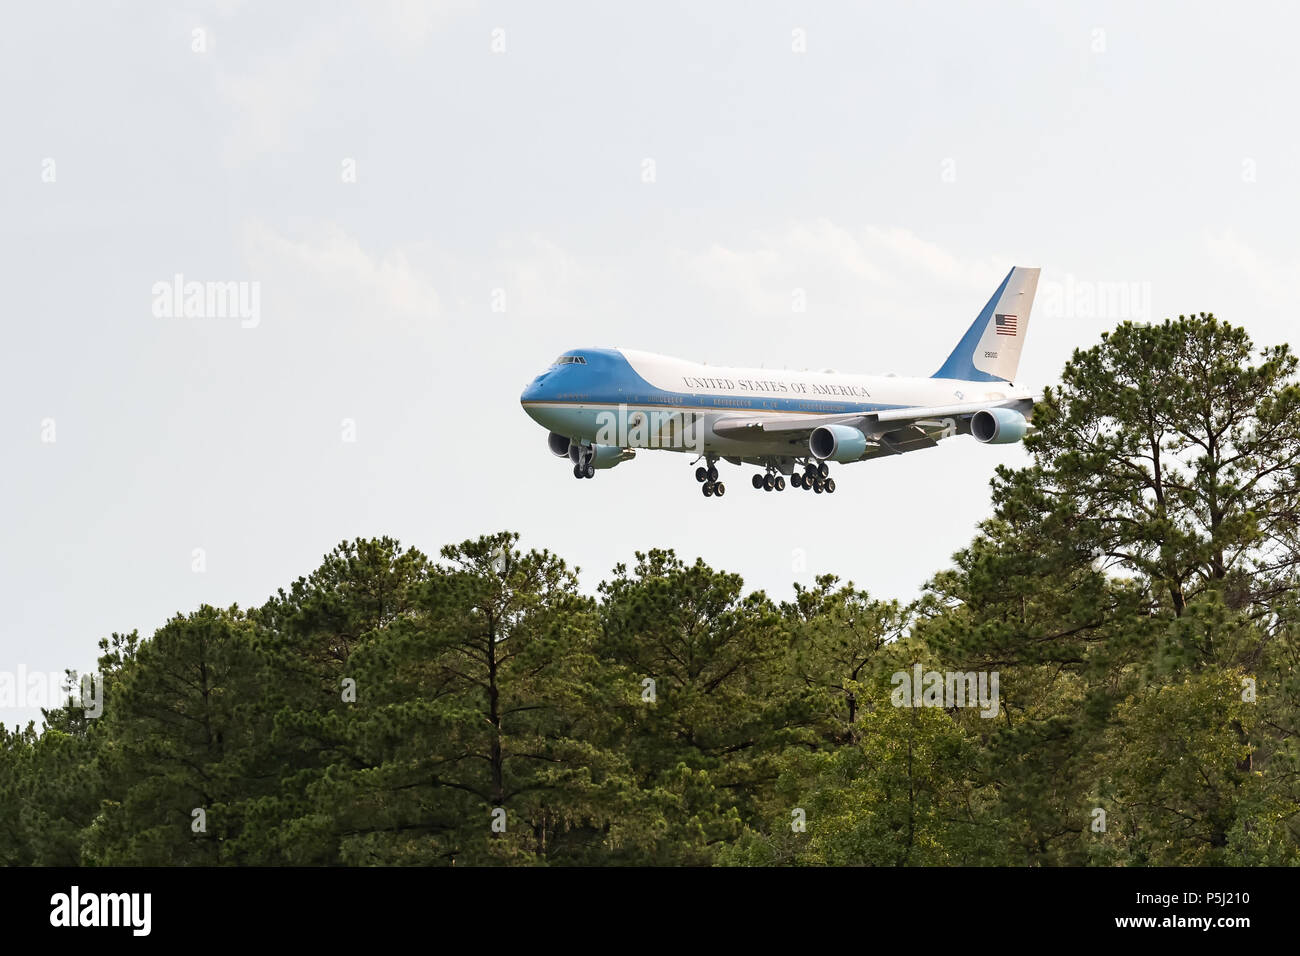 West Columbia, South Carolina USA - June 25, 2018: Onlookers watch as Air Force One carrying President Donald Trump touches down at the Columbia Metropolitan Airport following a landing delay due to inclement weather.  Donald Trump landed in West Columbia at about 7:45pm to attend a political rally meant to bolster support for his long time supporter, the incumbent South Carolina governor Henry McMaster, who faces John Warren in a GOP runoff on June 26, 2018. Credit: Crush Rush/Alamy Live News Stock Photo